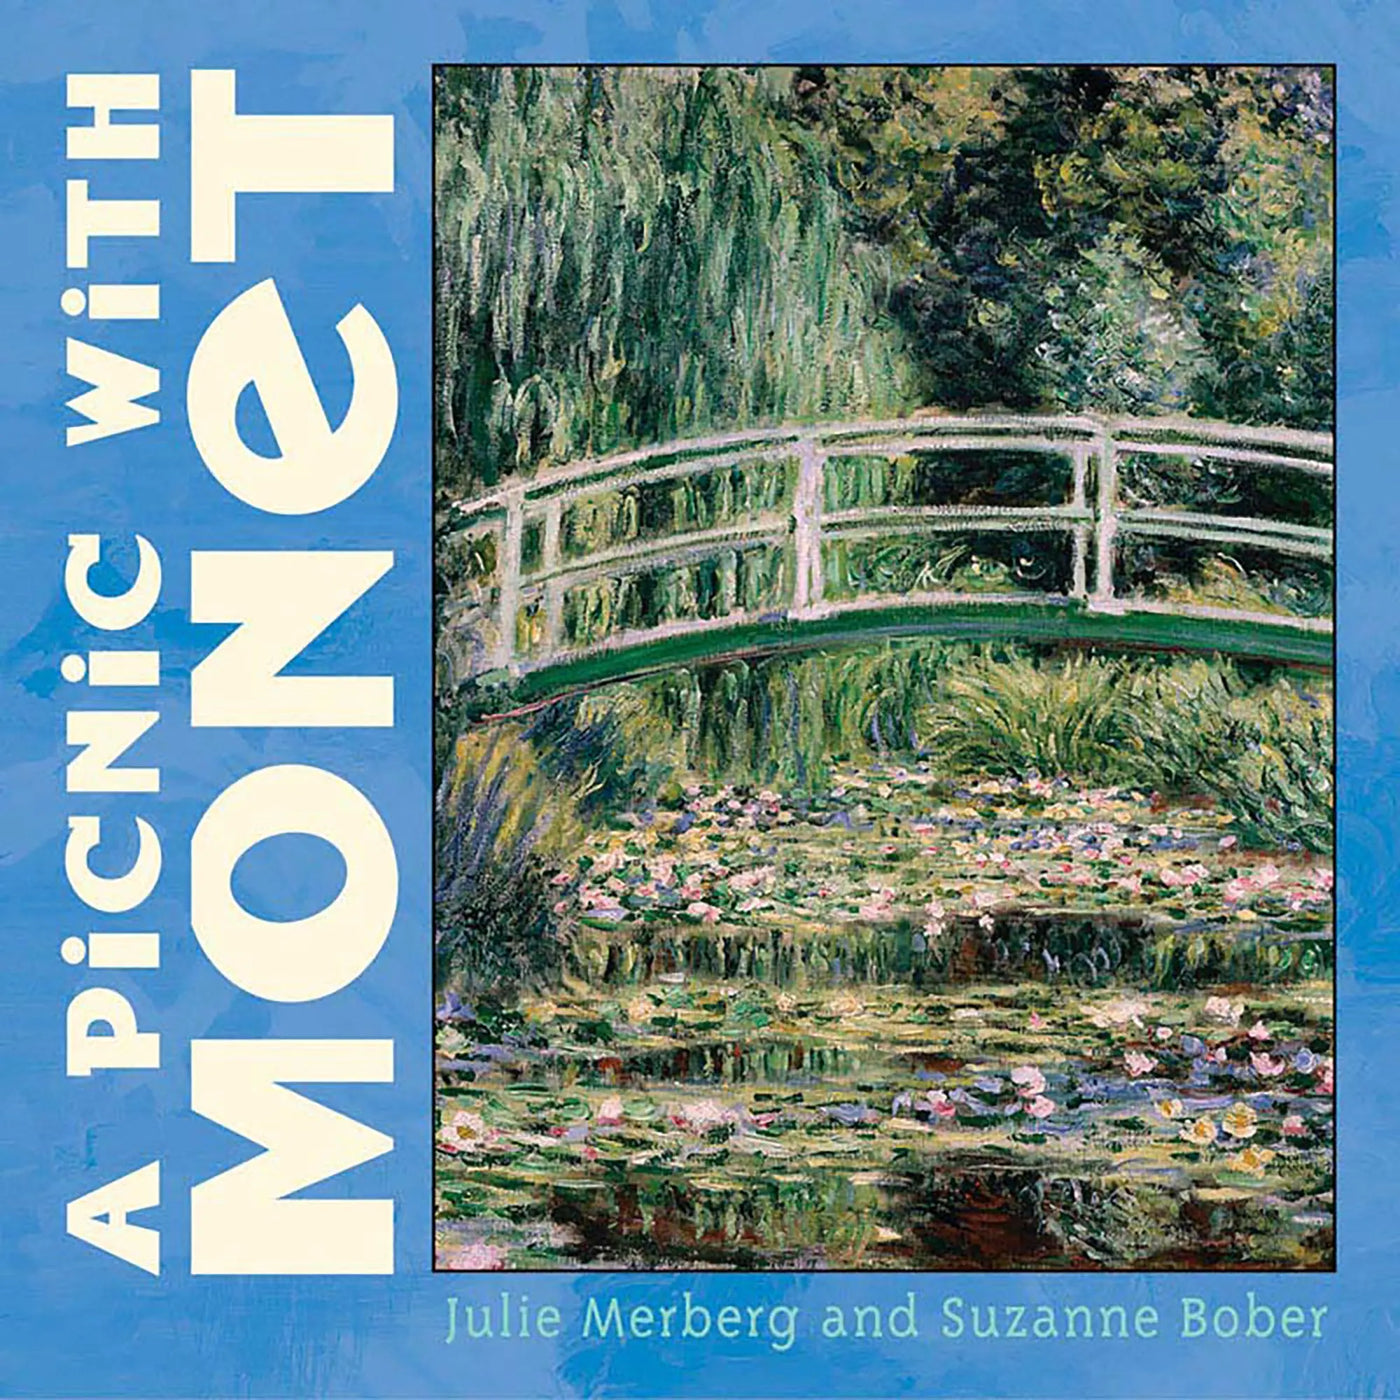 Picnic with Monet board book for children